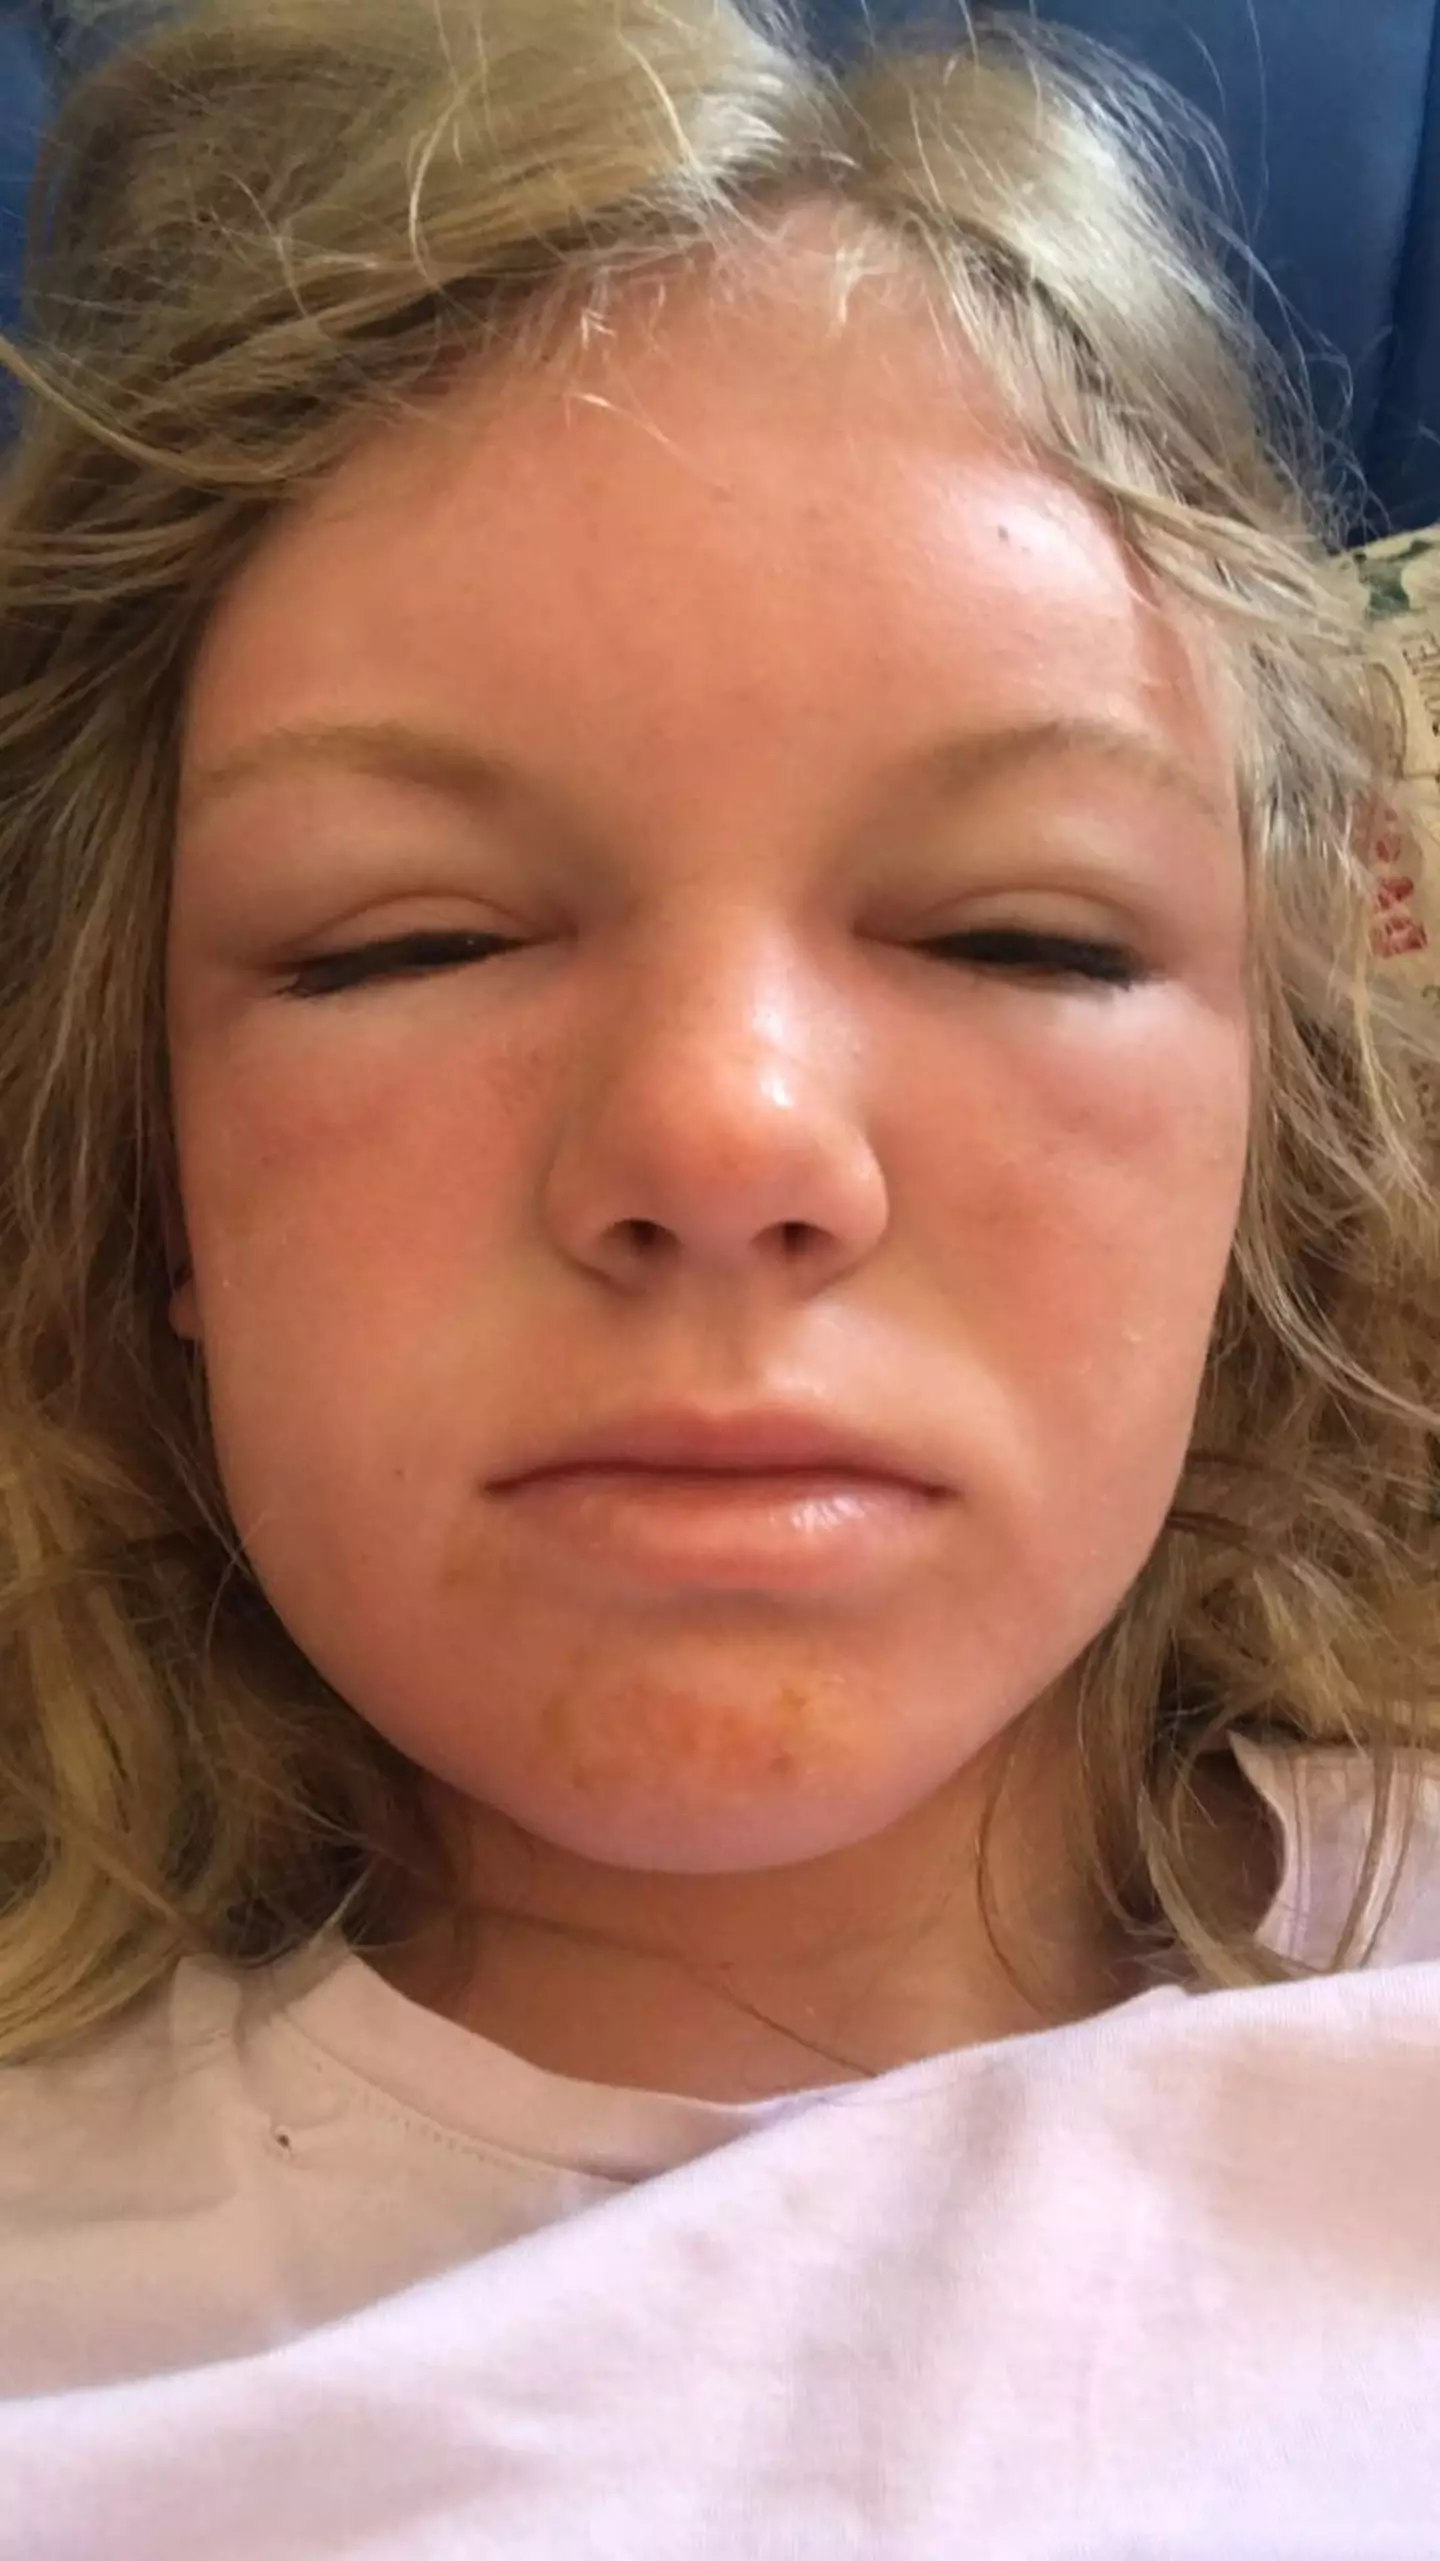 Her face became painful and swollen.